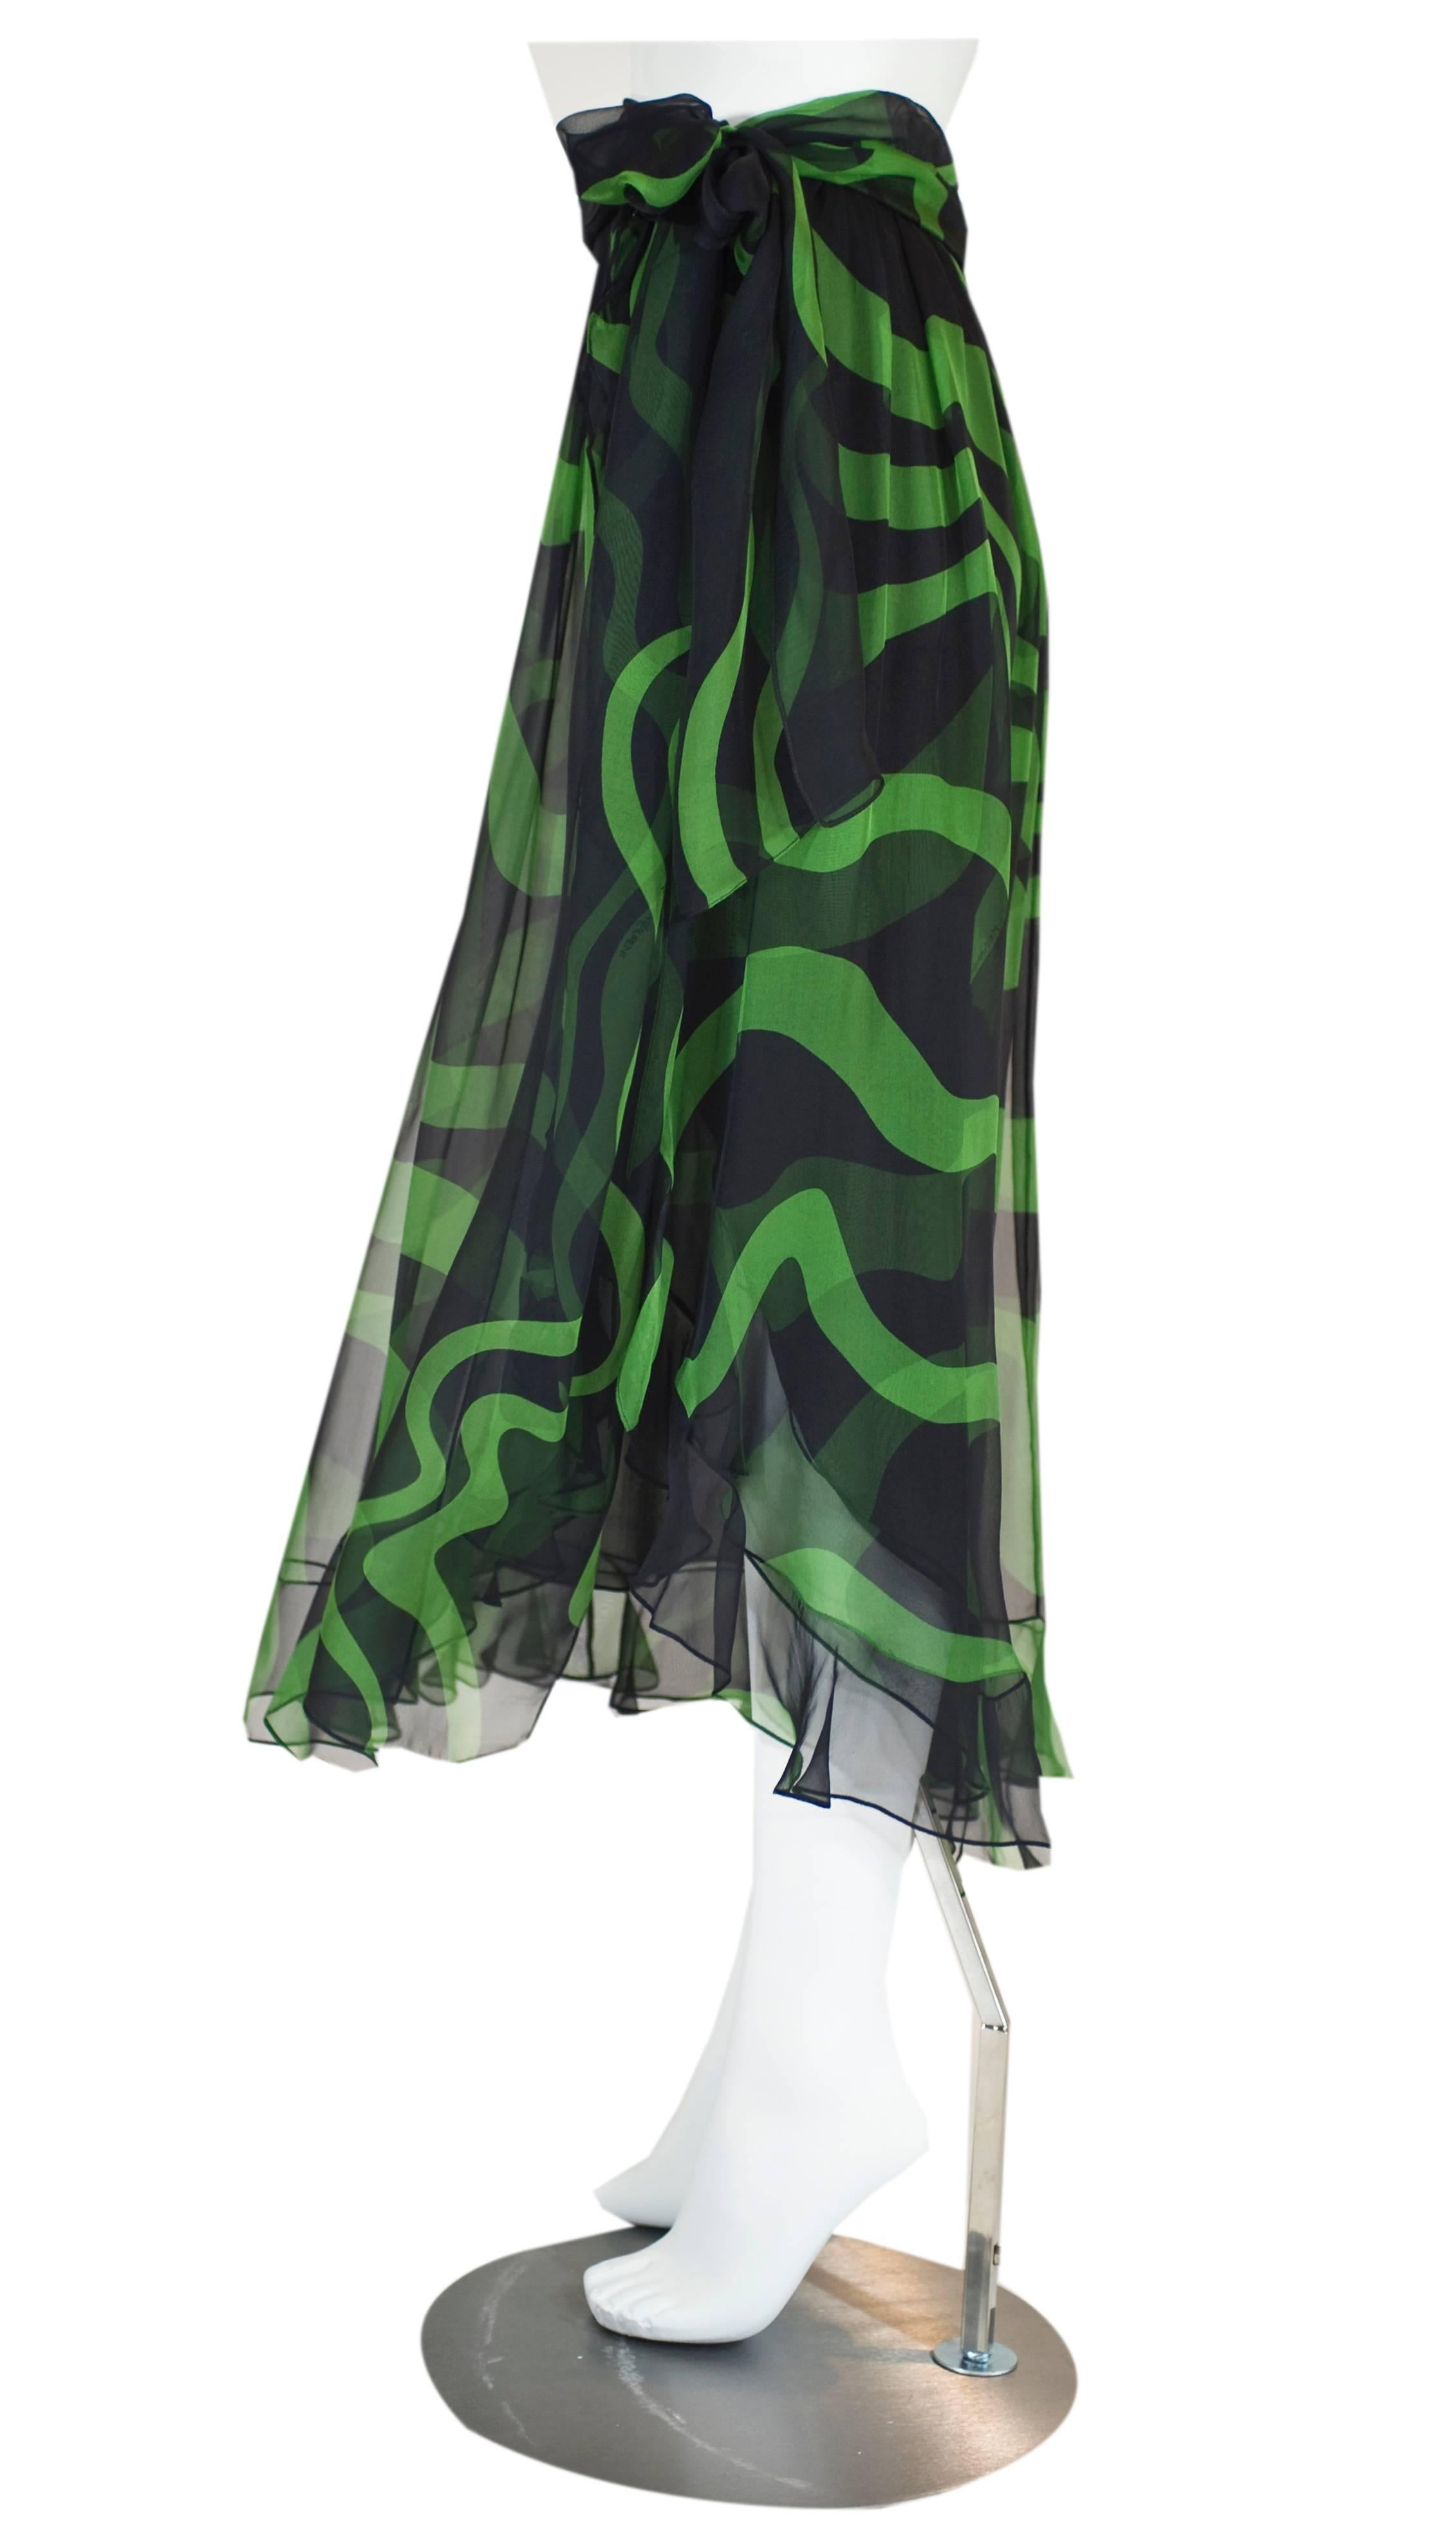 Yves Saint Laurent Black and Green Silk Chiffon Ruffle Trim Sash Skirt, 2004 In Excellent Condition For Sale In Boca Raton, FL